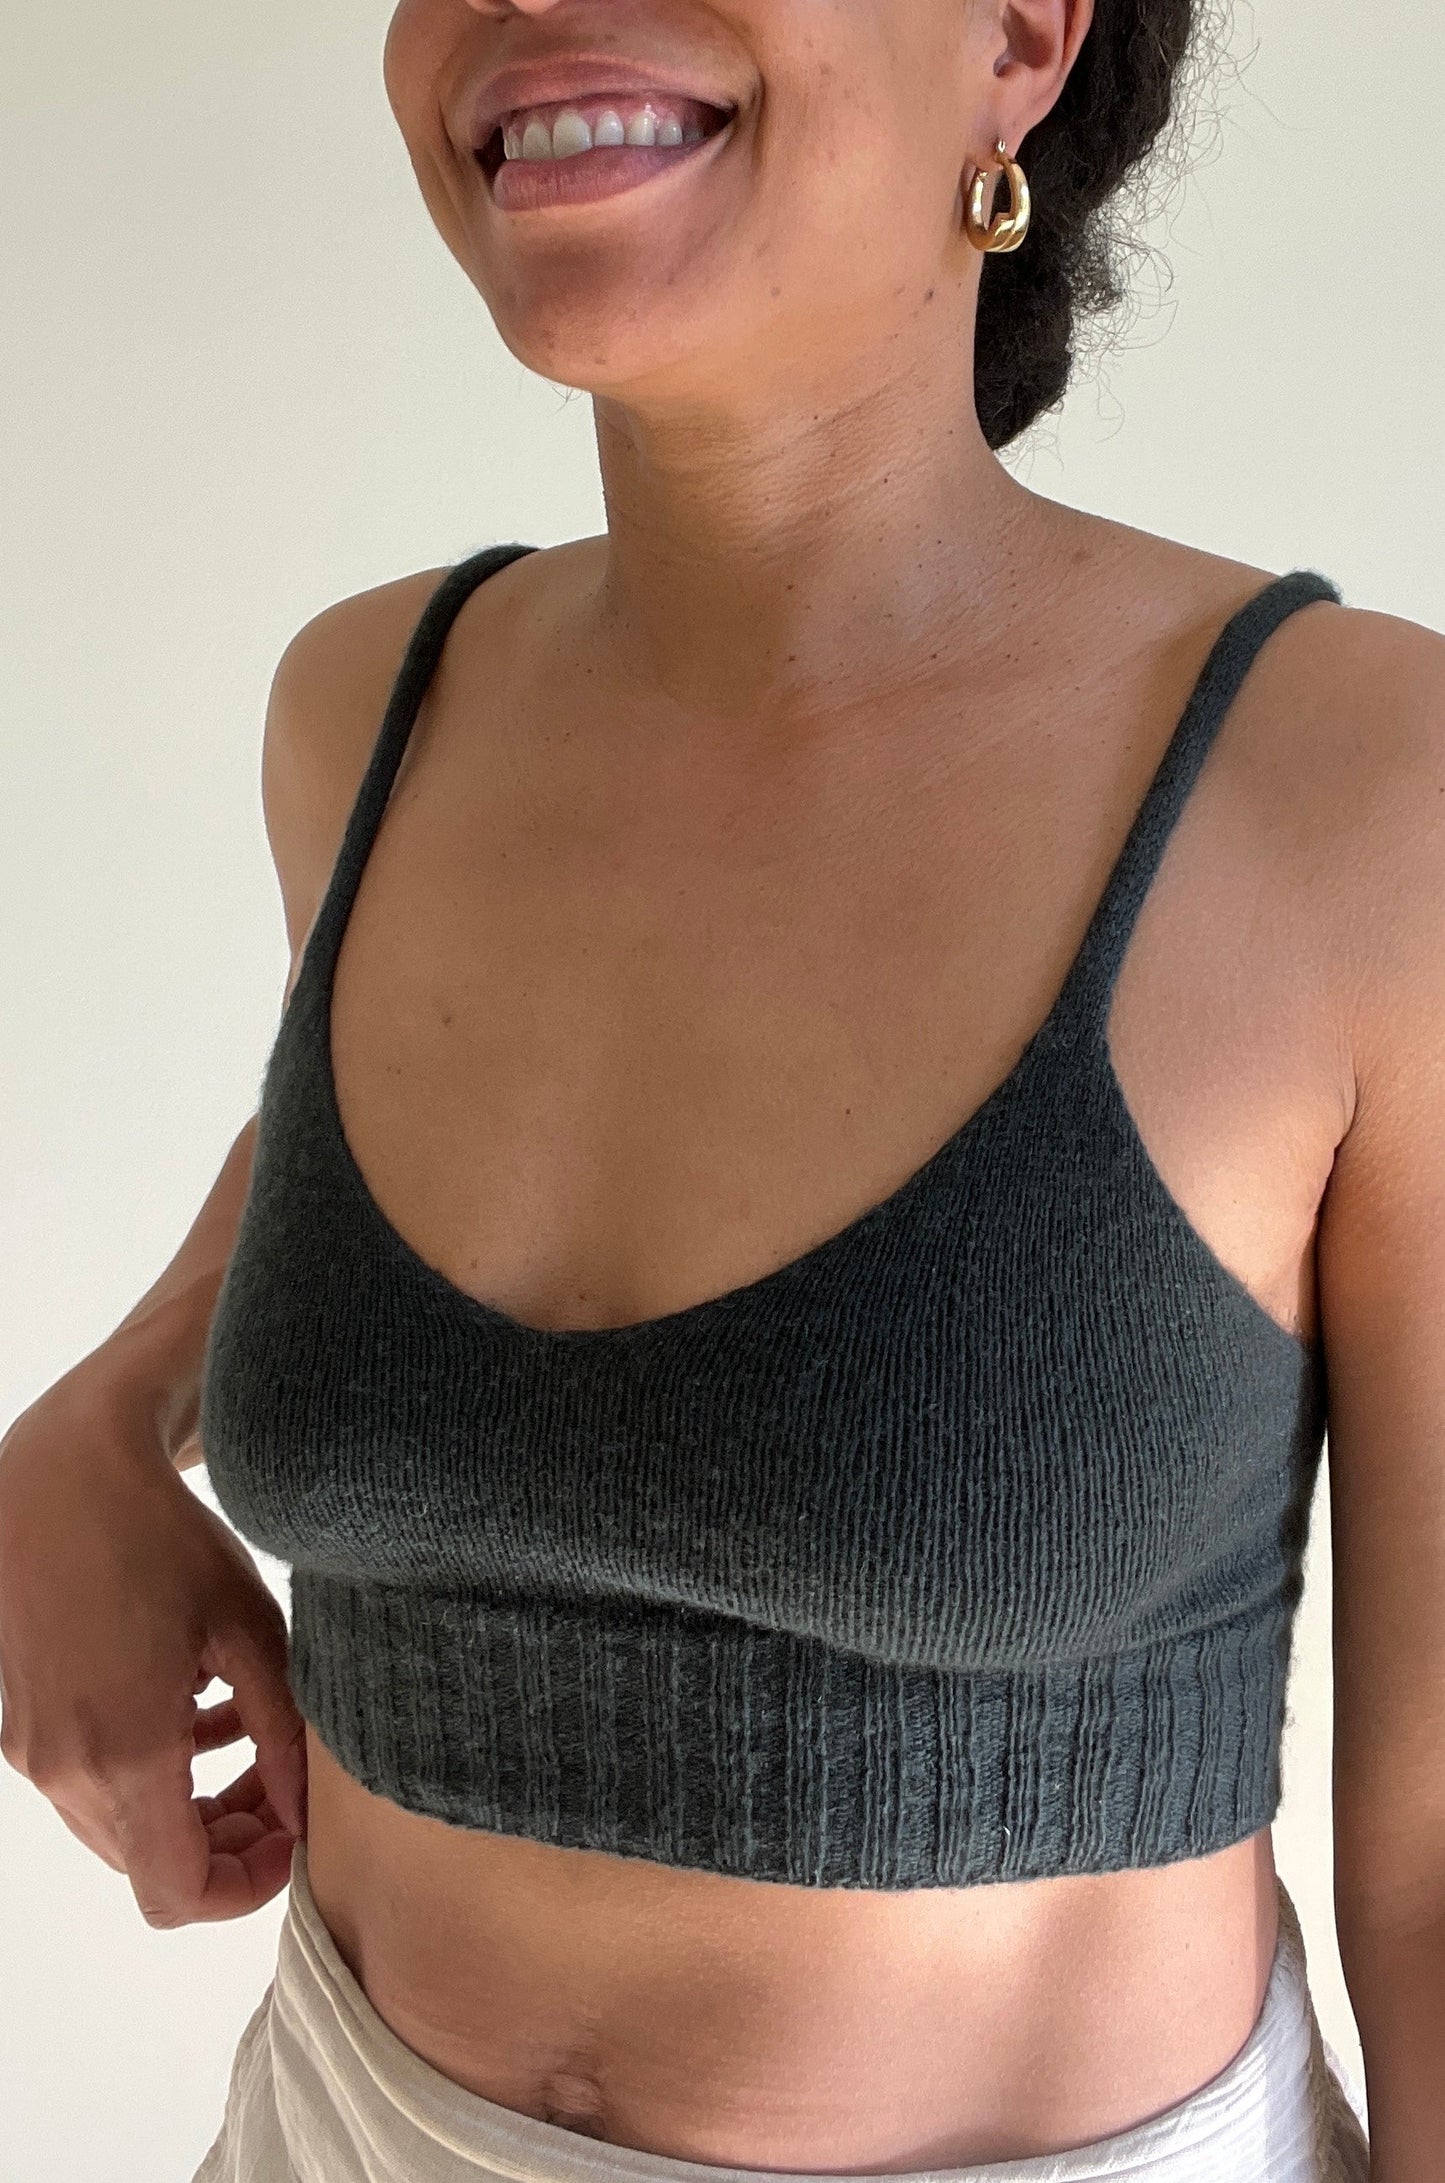 PURL PAL: The Simple Bralette – the thread